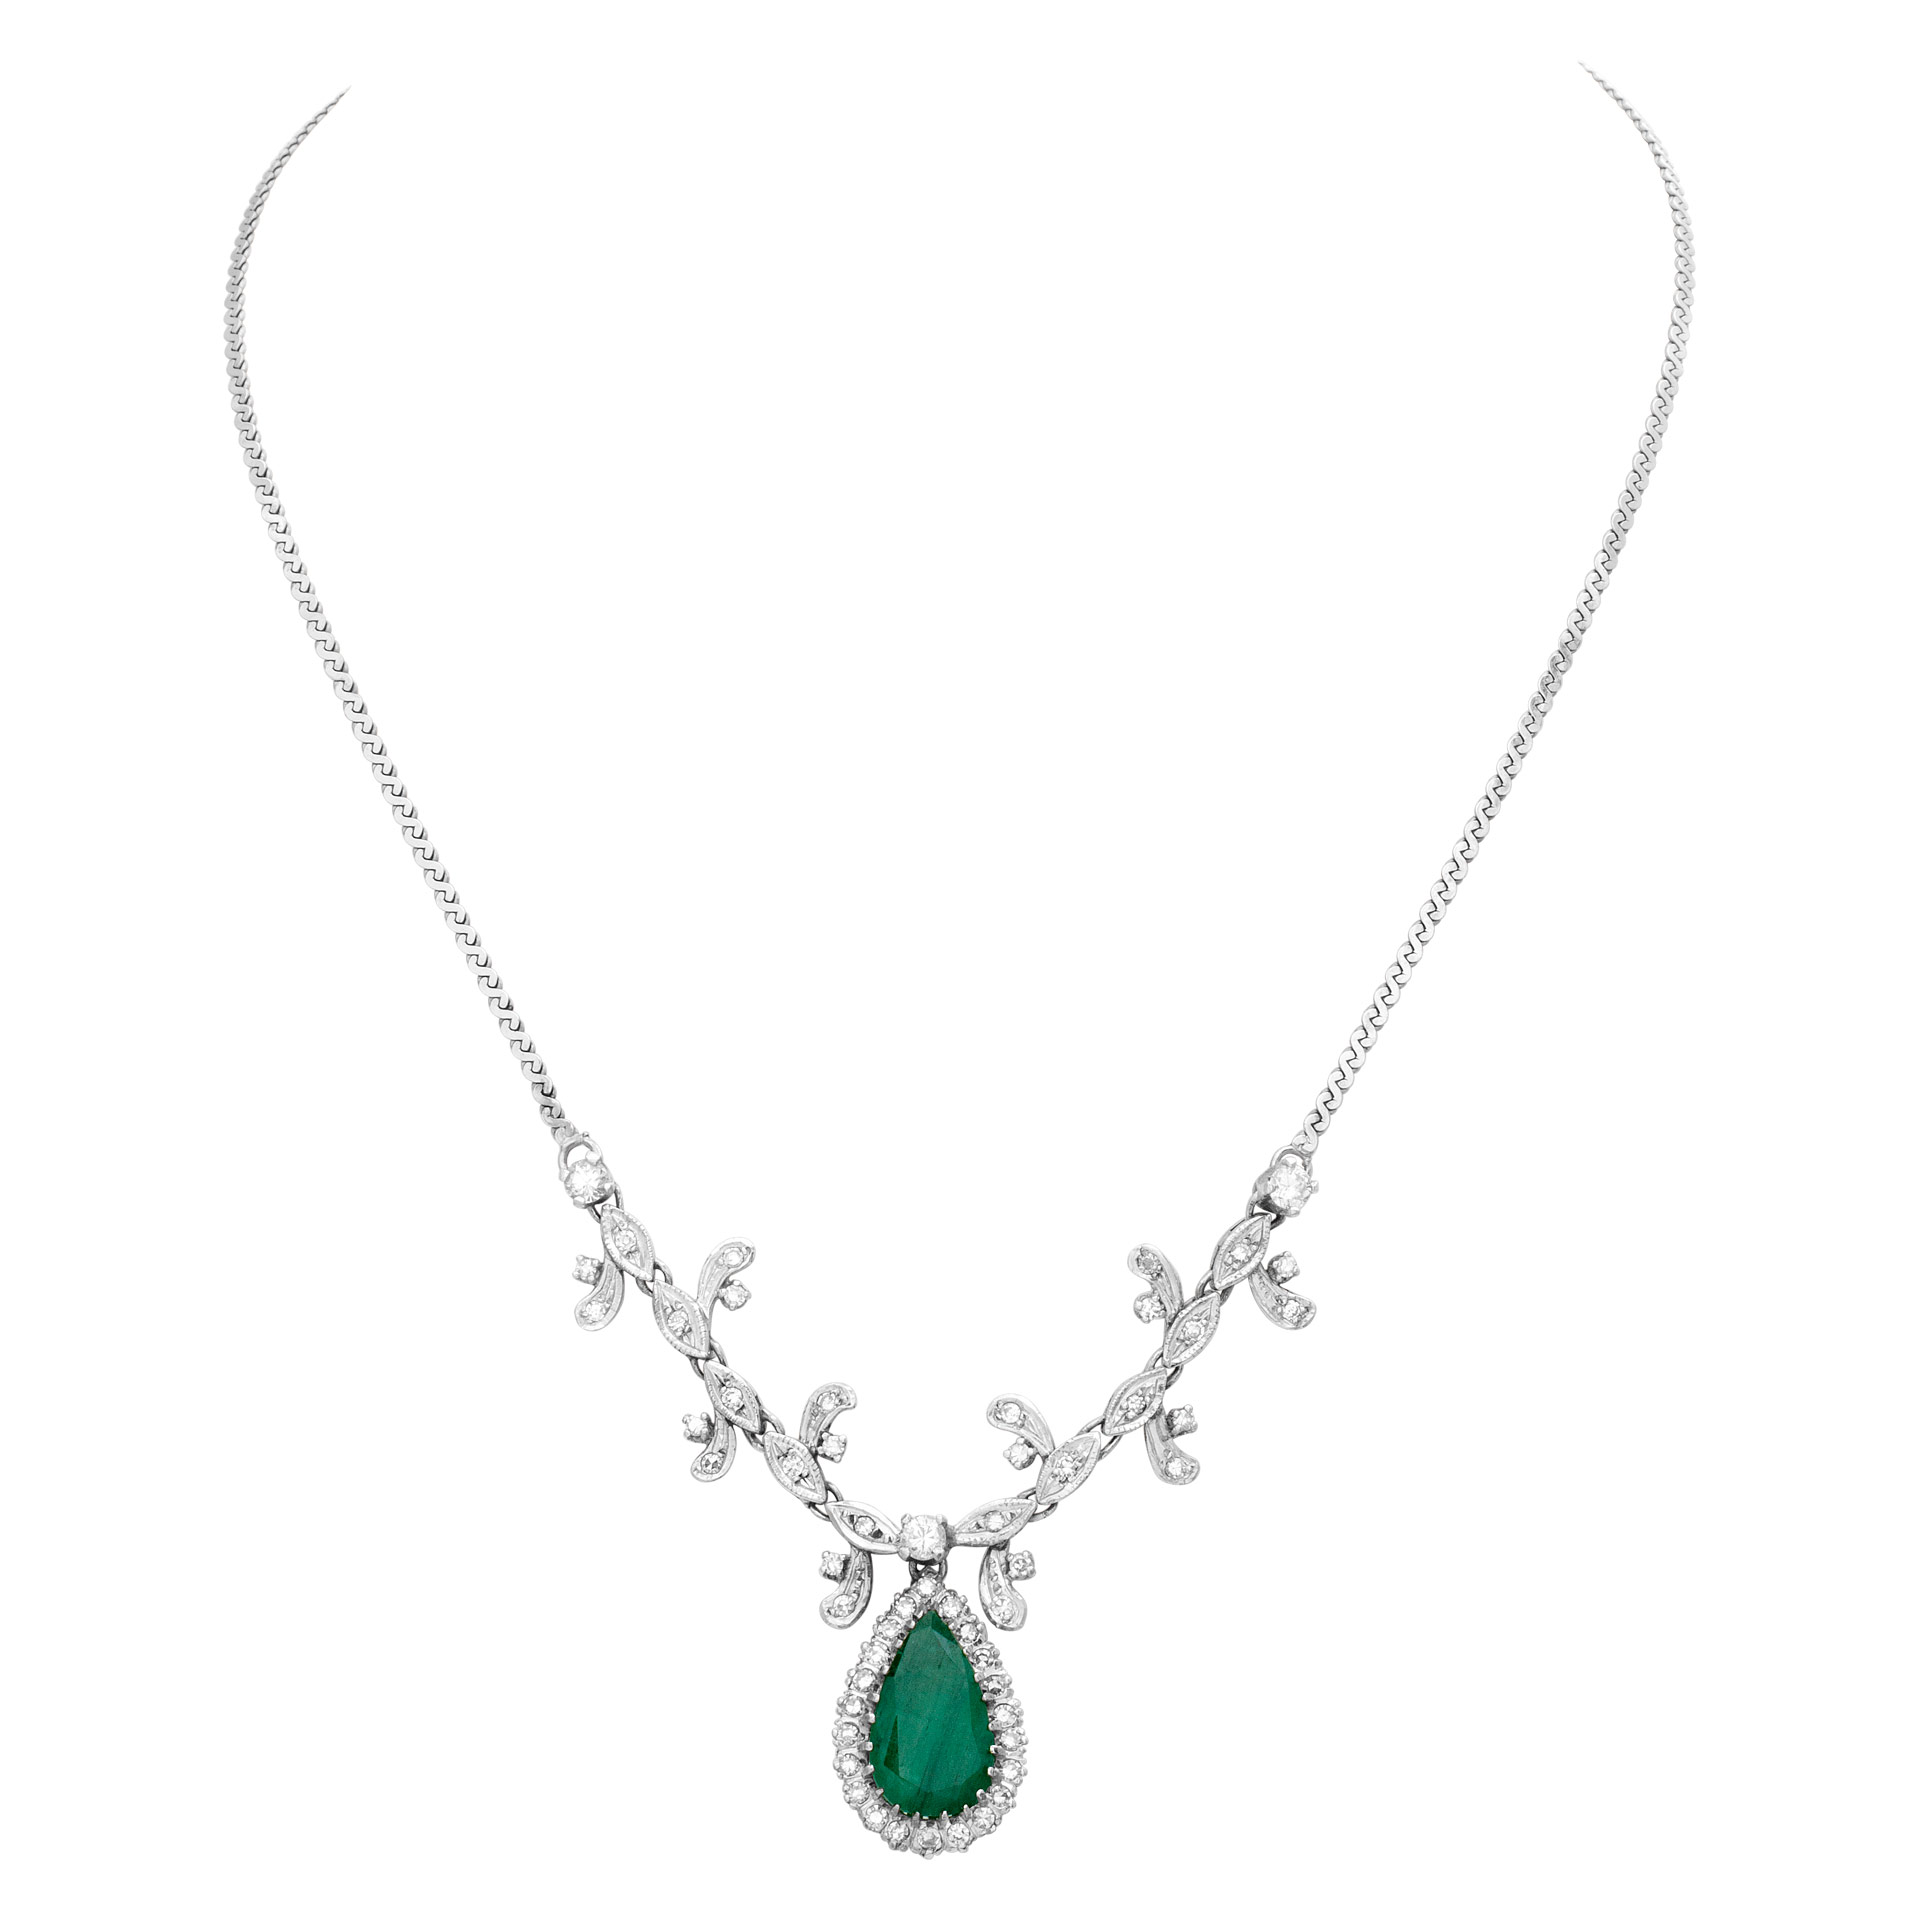 Teardrop Emerald necklace with diamonds set in 18k white gold. image 1